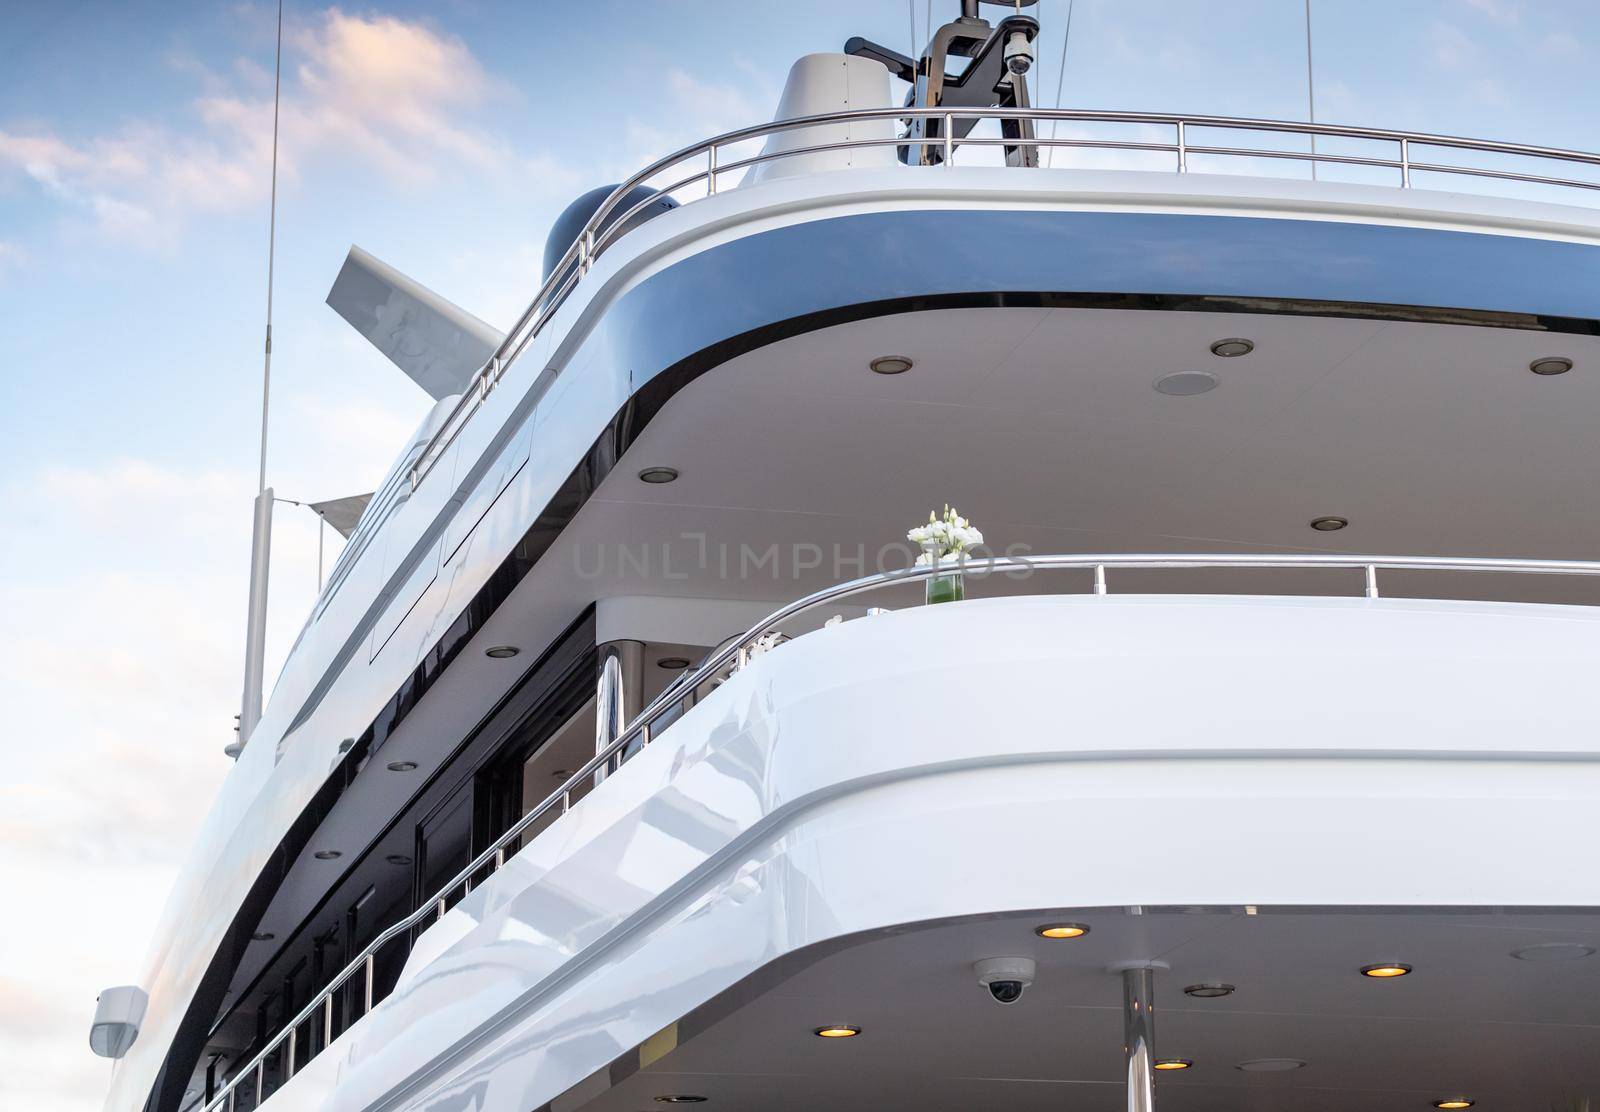 The top deck of a huge yacht at sunset, Glossy board of the boat, The chromeplated handrail